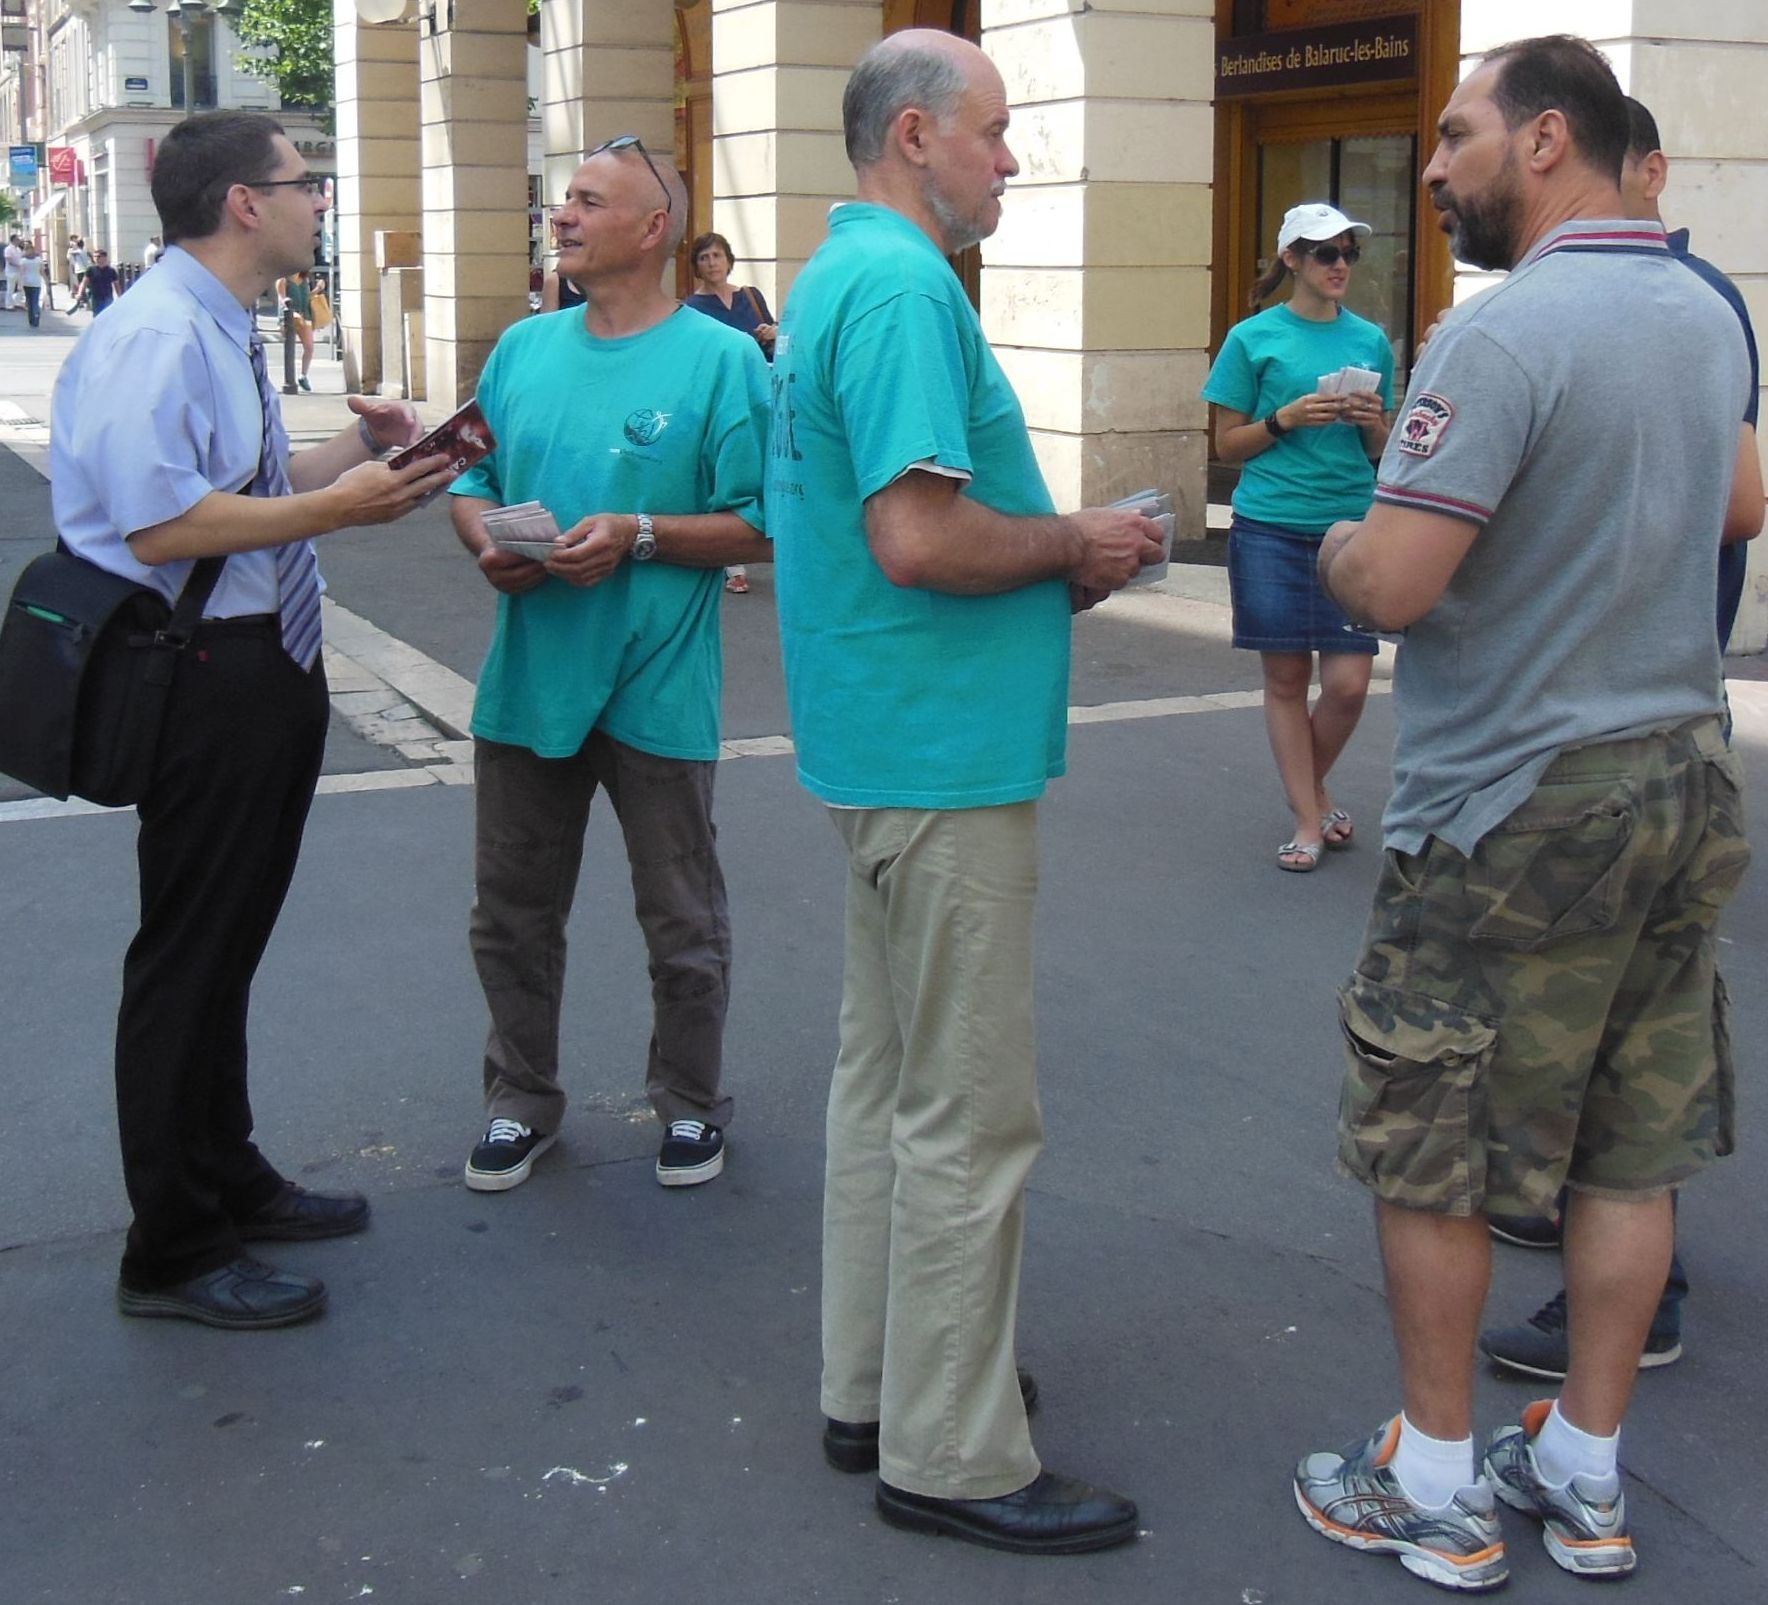 Volunteers talk to passers-by about the drug problem and introduce them to the Truth About Drugs initiative on the popular Saint Ferréol walking street in Marseilles.